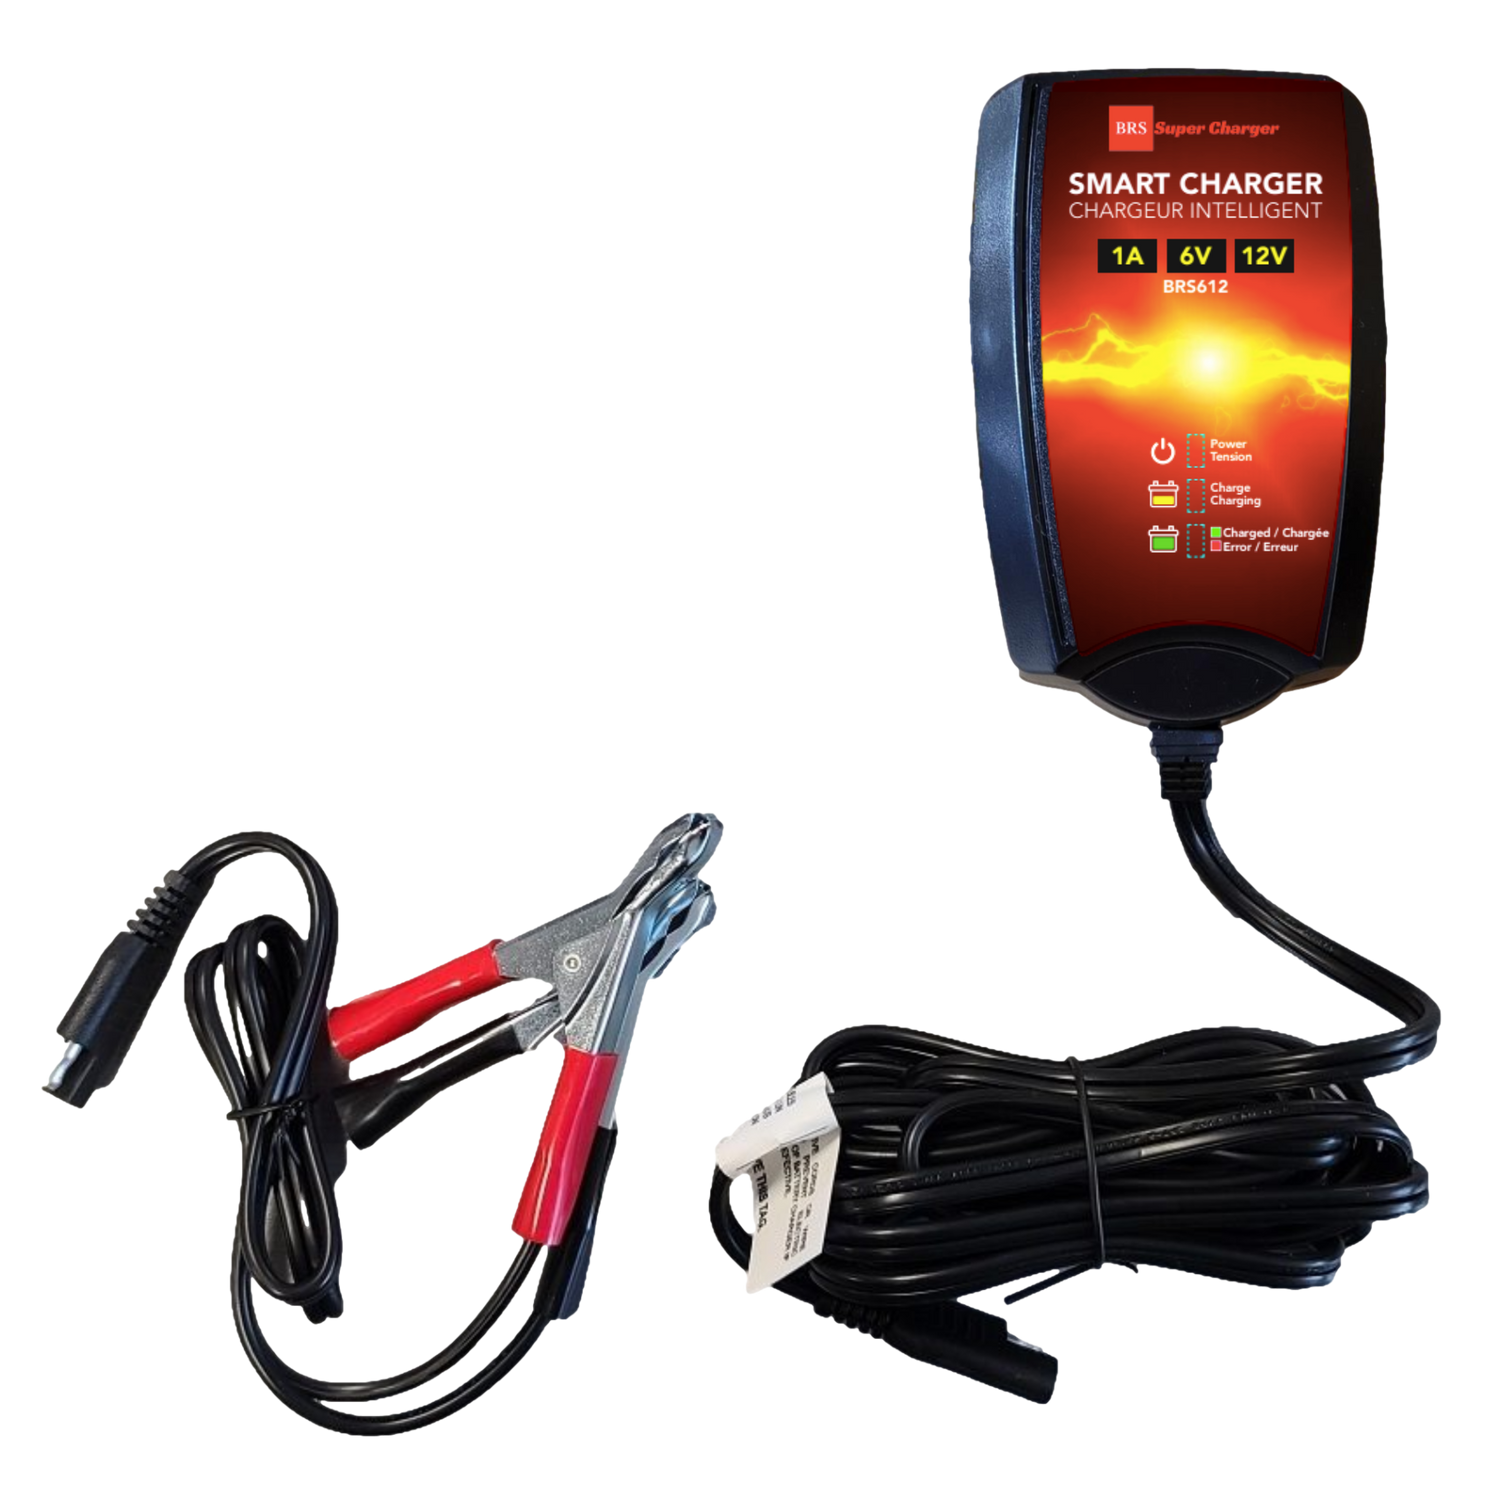 BRS20-BS 30 Day Warranty Battery & Smart Charger / Maintainer Combo Bundle Kit - BRS Super Battery